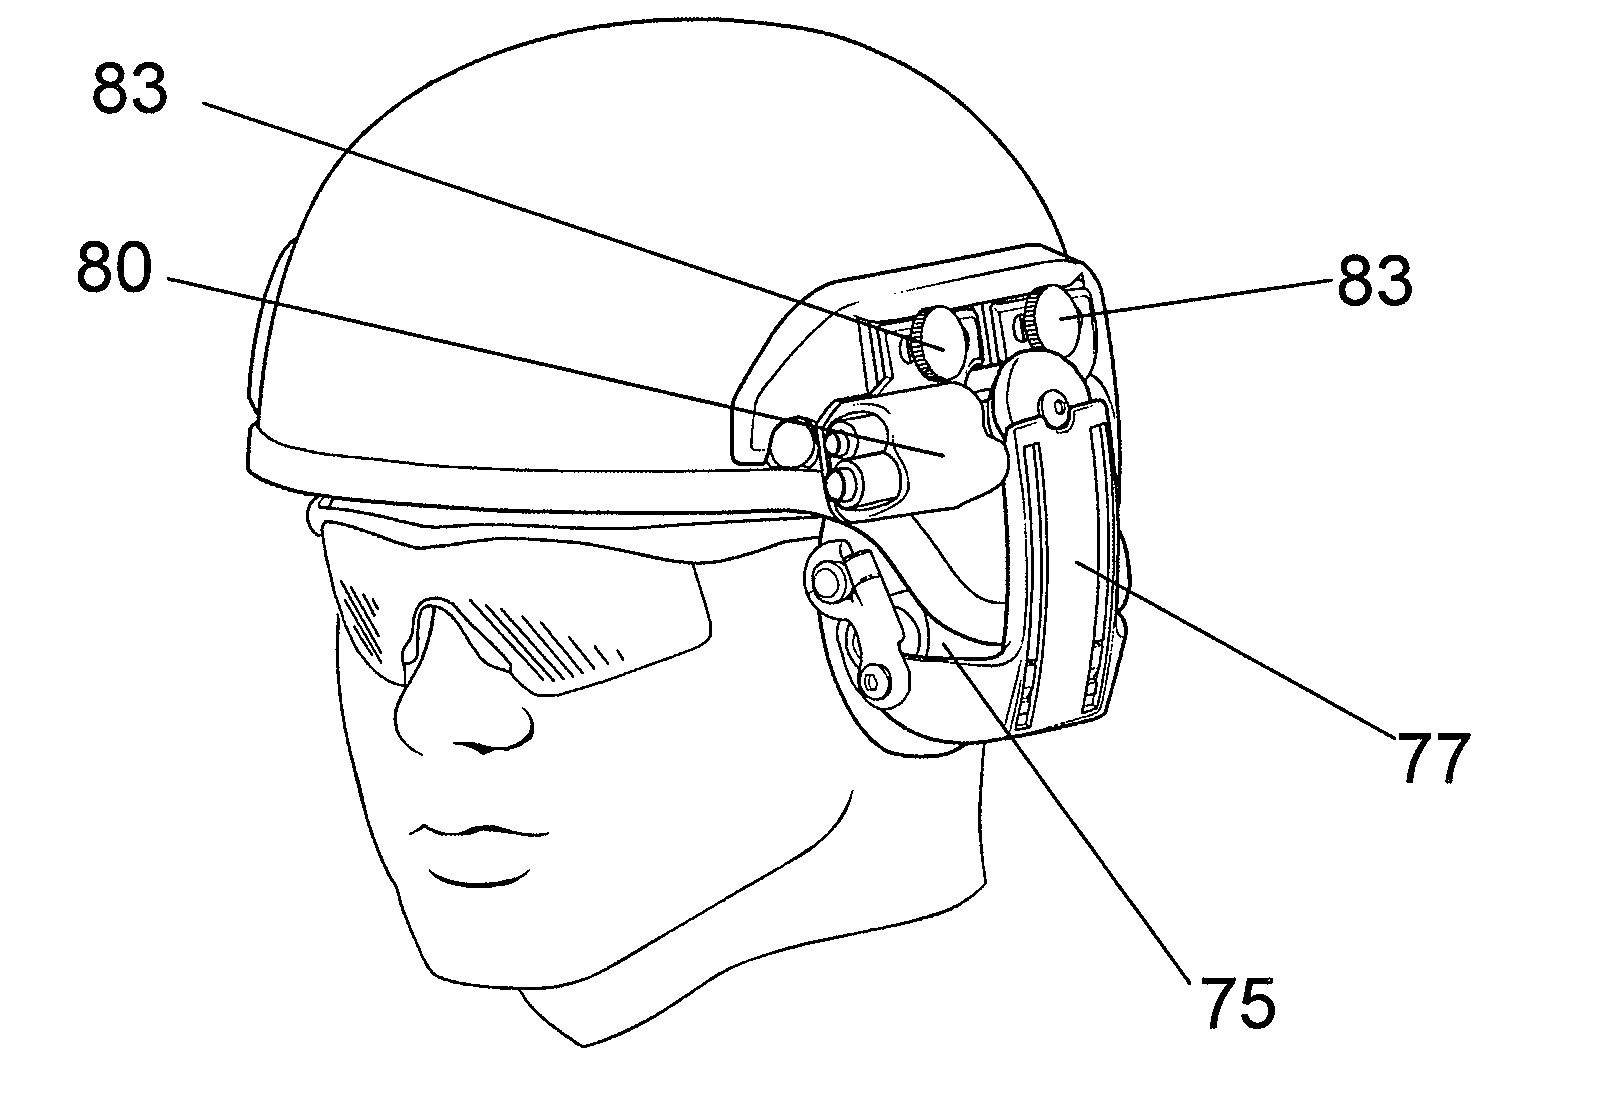 Hinged Attachment of Headgear to a Helmet